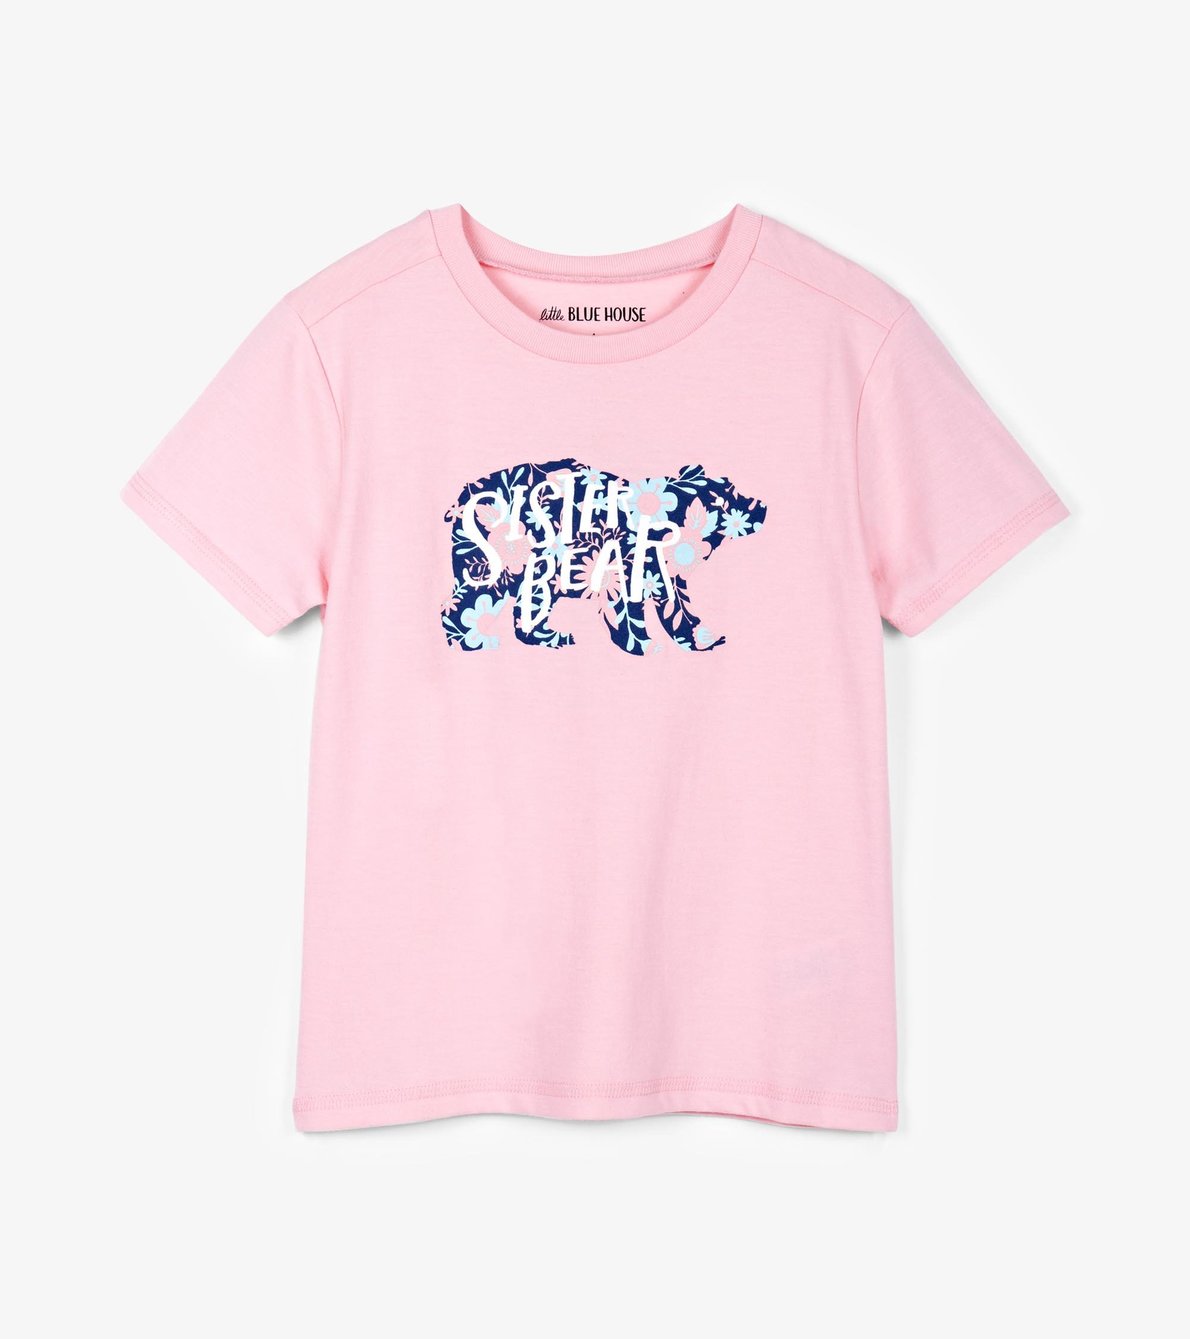 View larger image of Sister Bear Kids Crew Neck Tee